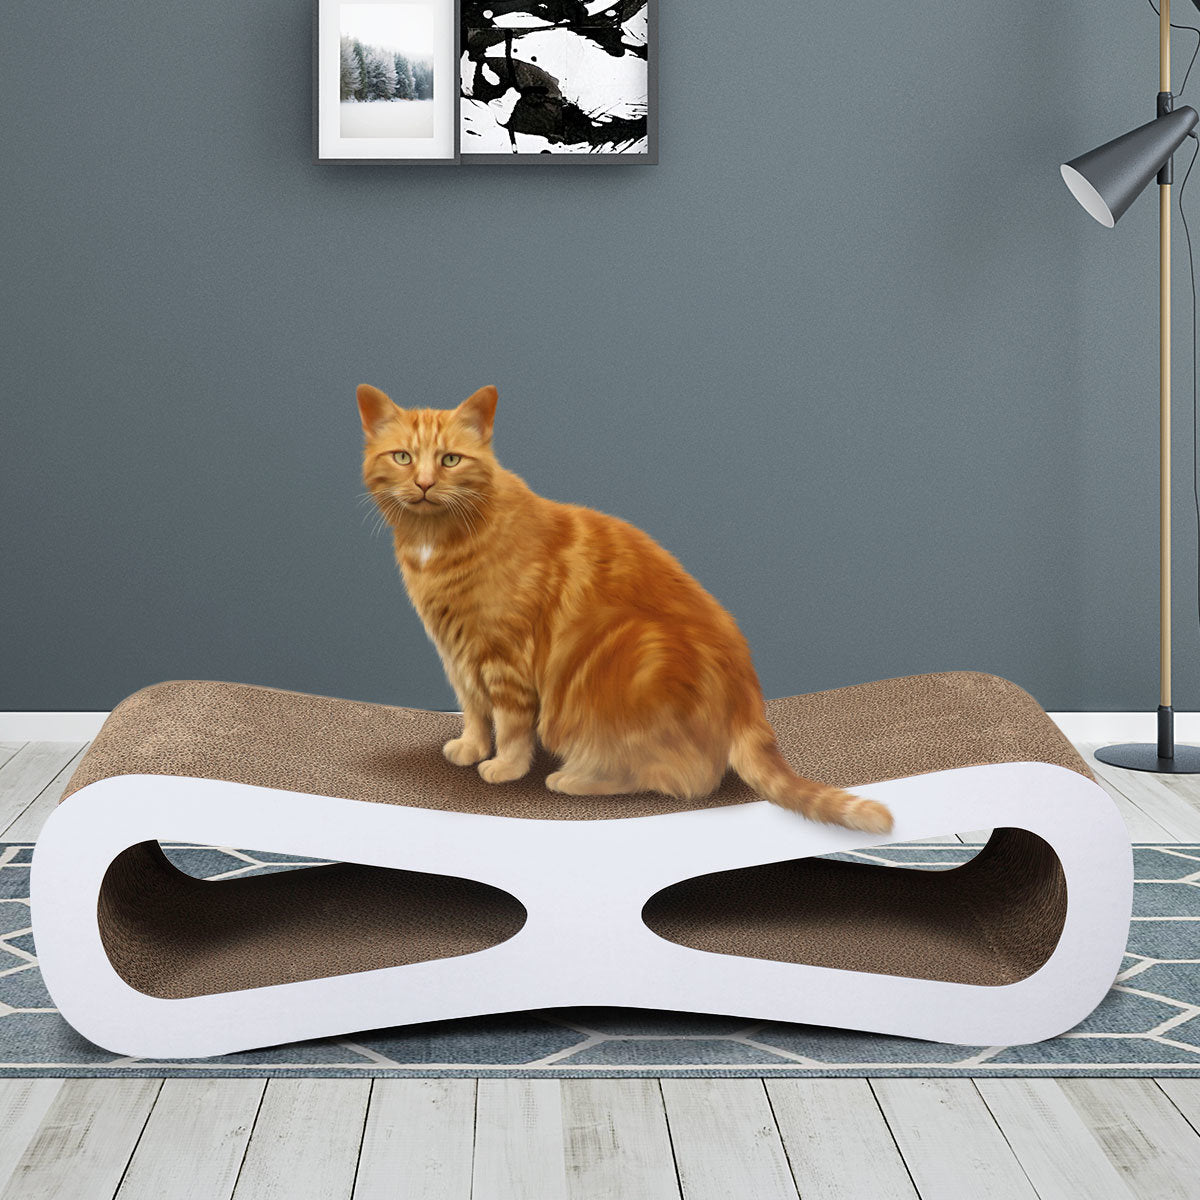 Cat-Eyed Cat Scratcher and Lounge, Protect Furniture, Functional, Original Wood Color